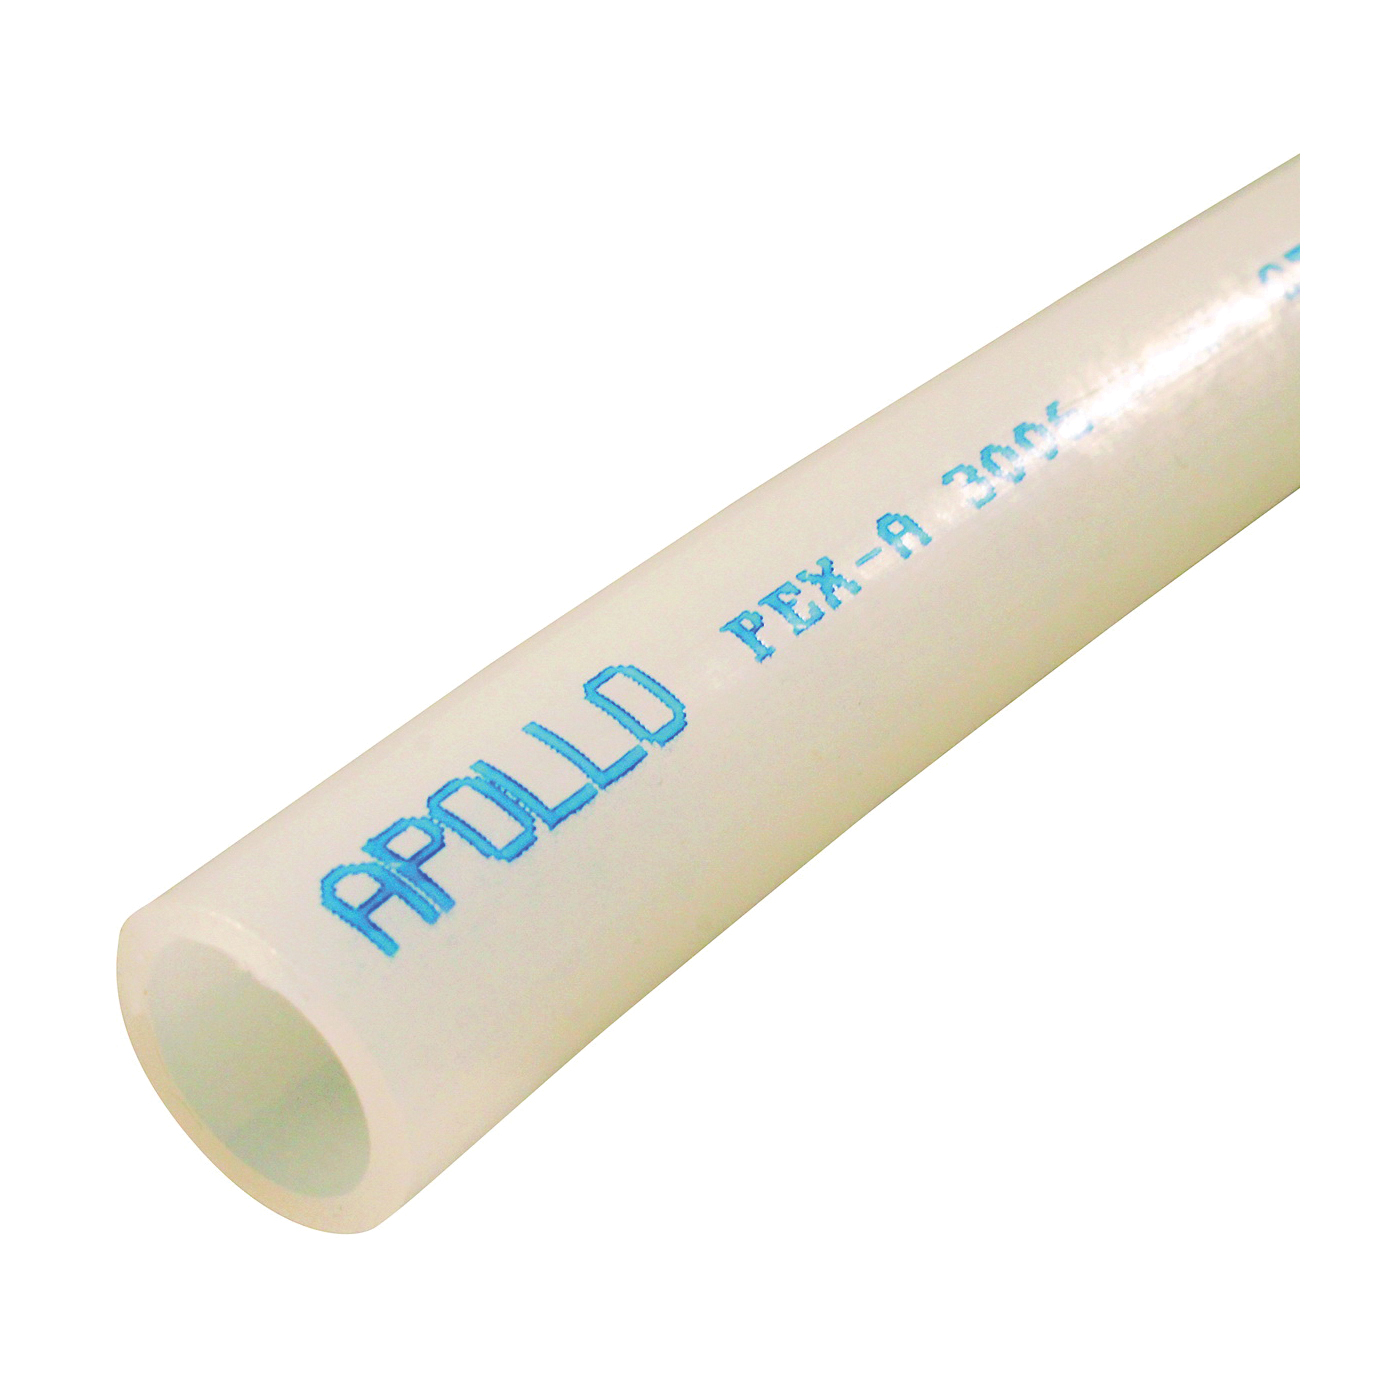 EPPB30012 PEX-A Pipe Tubing, 1/2 in, Opaque, 300 ft L